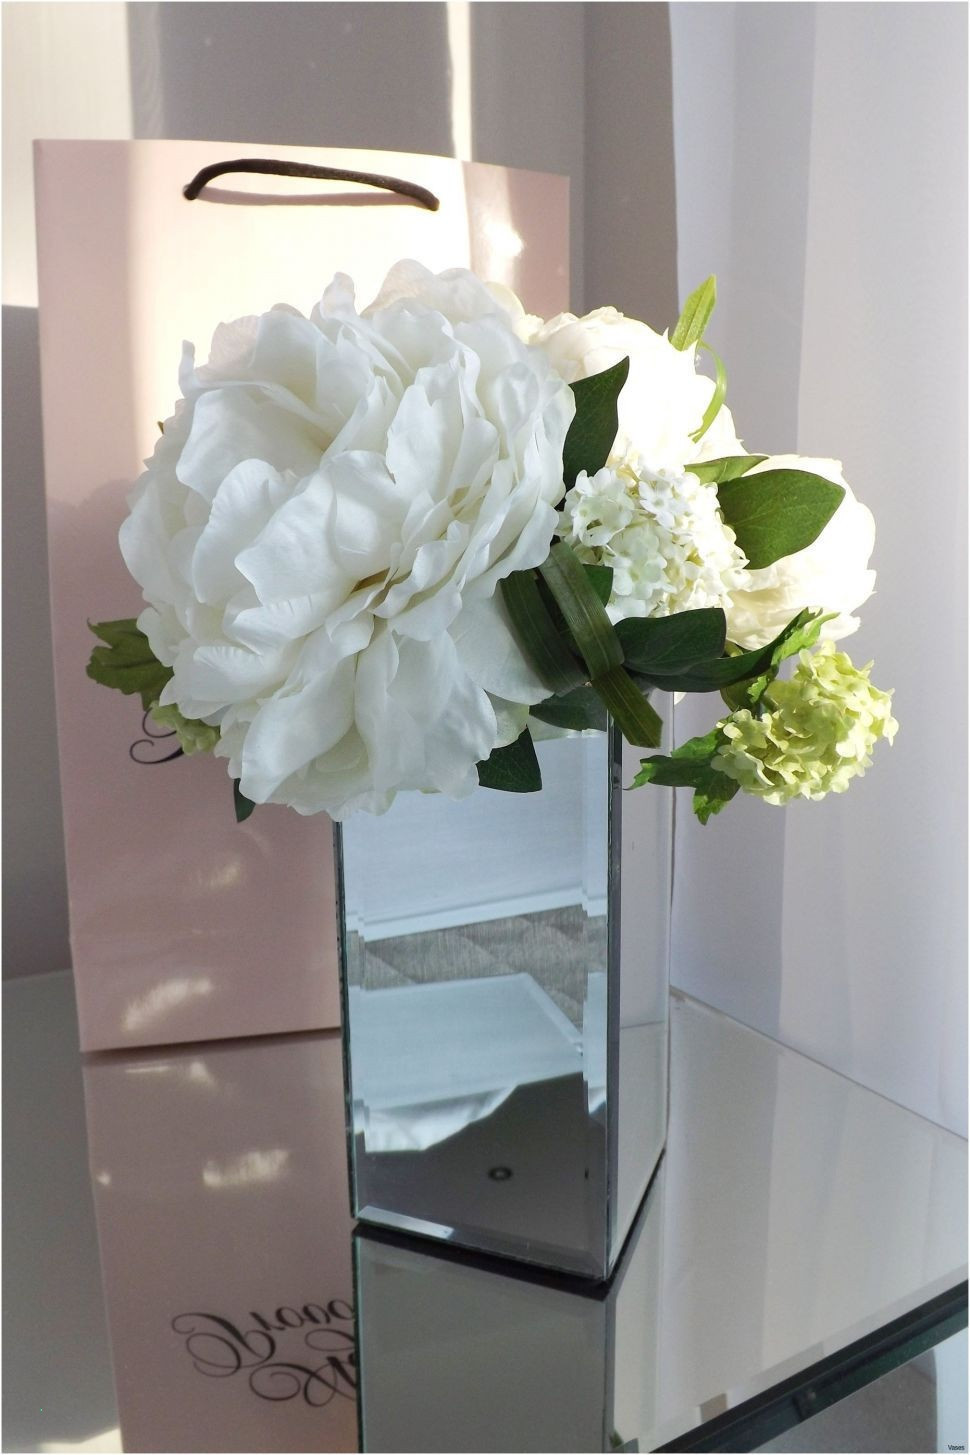 22 Spectacular Flowers with Free Delivery and Free Vase 2024 free download flowers with free delivery and free vase of interesting photos roses flowers natural zoom regarding silk flowers metal vases 3h mirrored mosaic vase votivei 0d design design ideas artificial